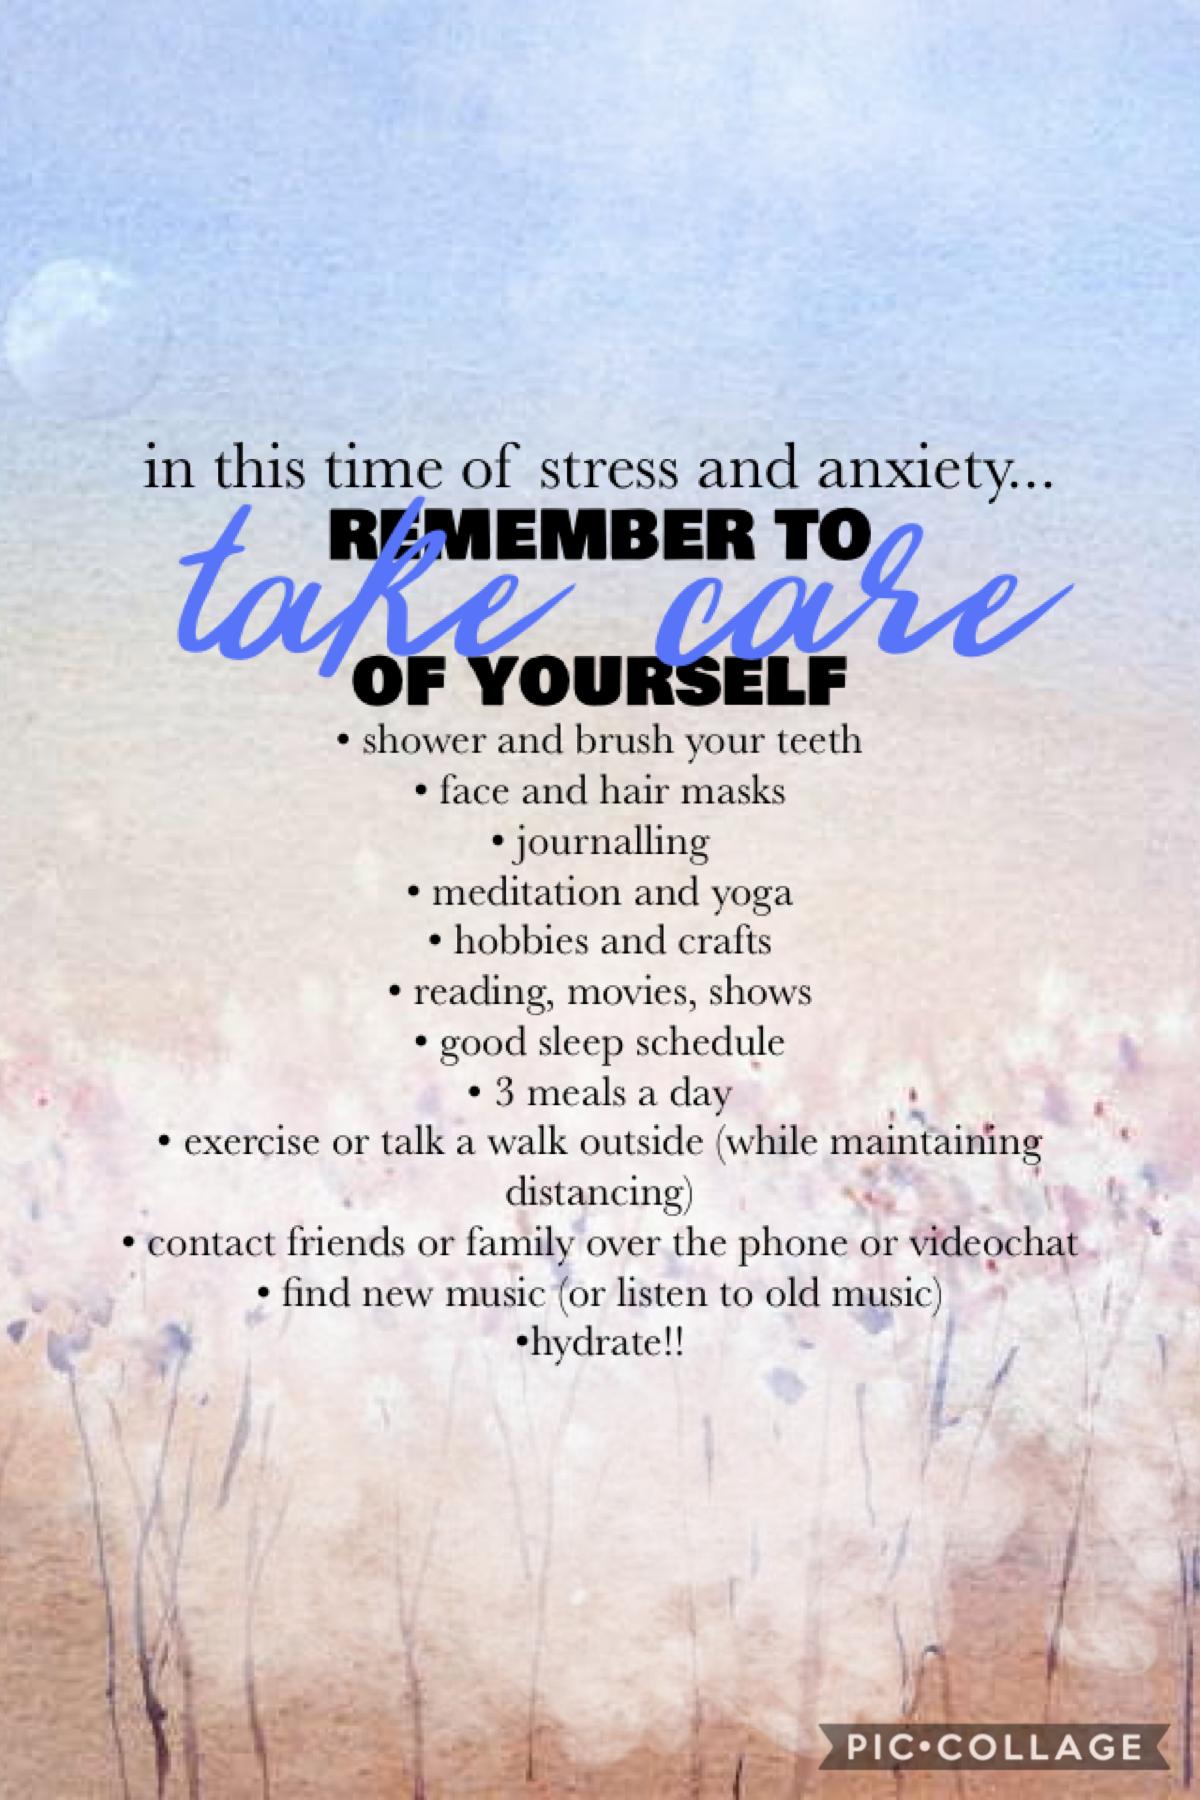 The virus is affecting everyone differently and may be causing more anxiety and hurting your mental health so remember to take care of yourself!💕
—side note: Sorry if I take long to respond!—